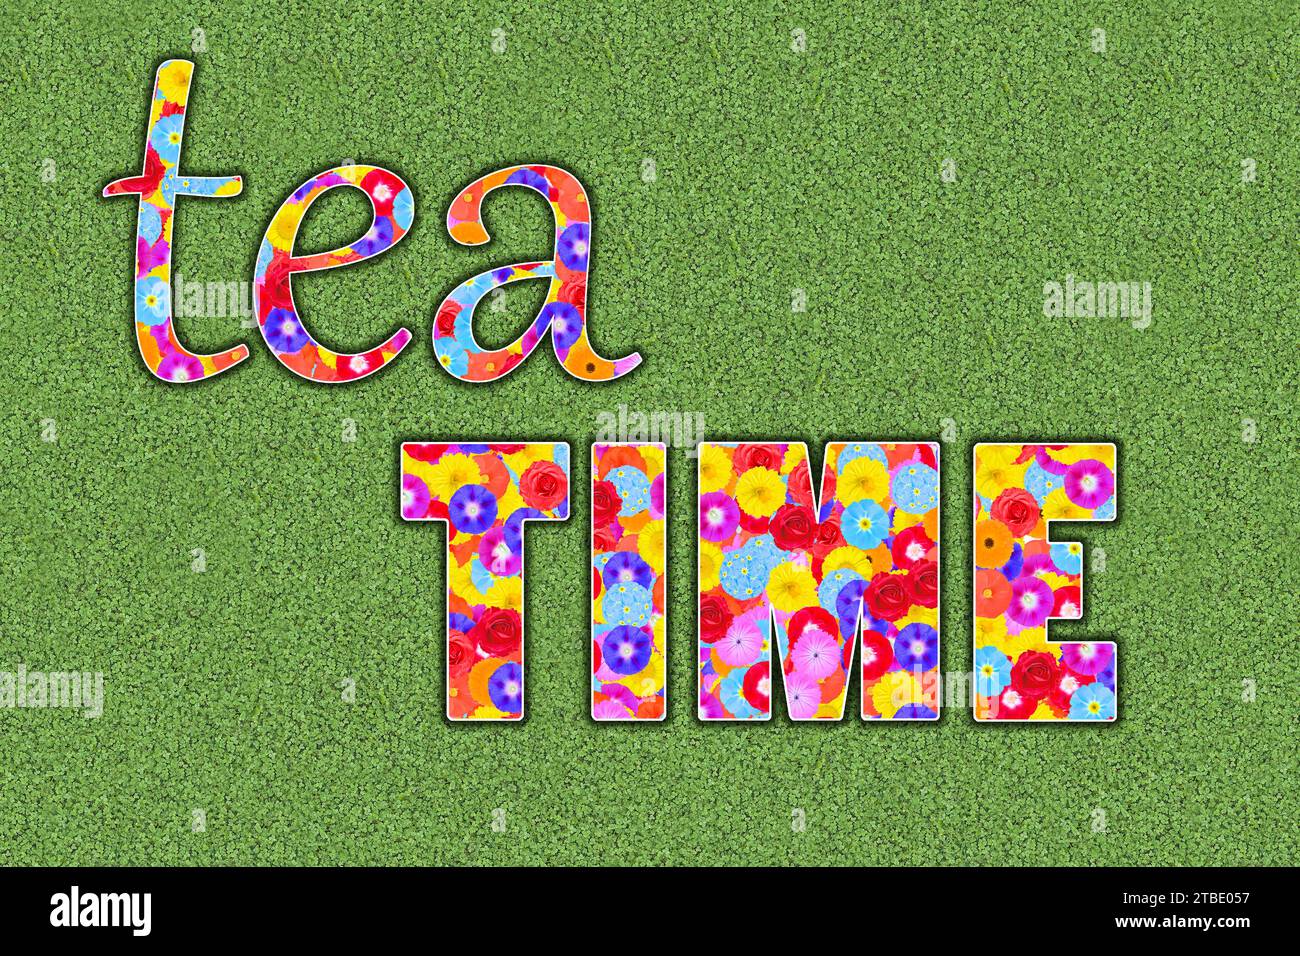 Tea Time in England, Great Britain, United Kingdom, Illustration, Graphic Design, Text, written, flowery Stock Photo